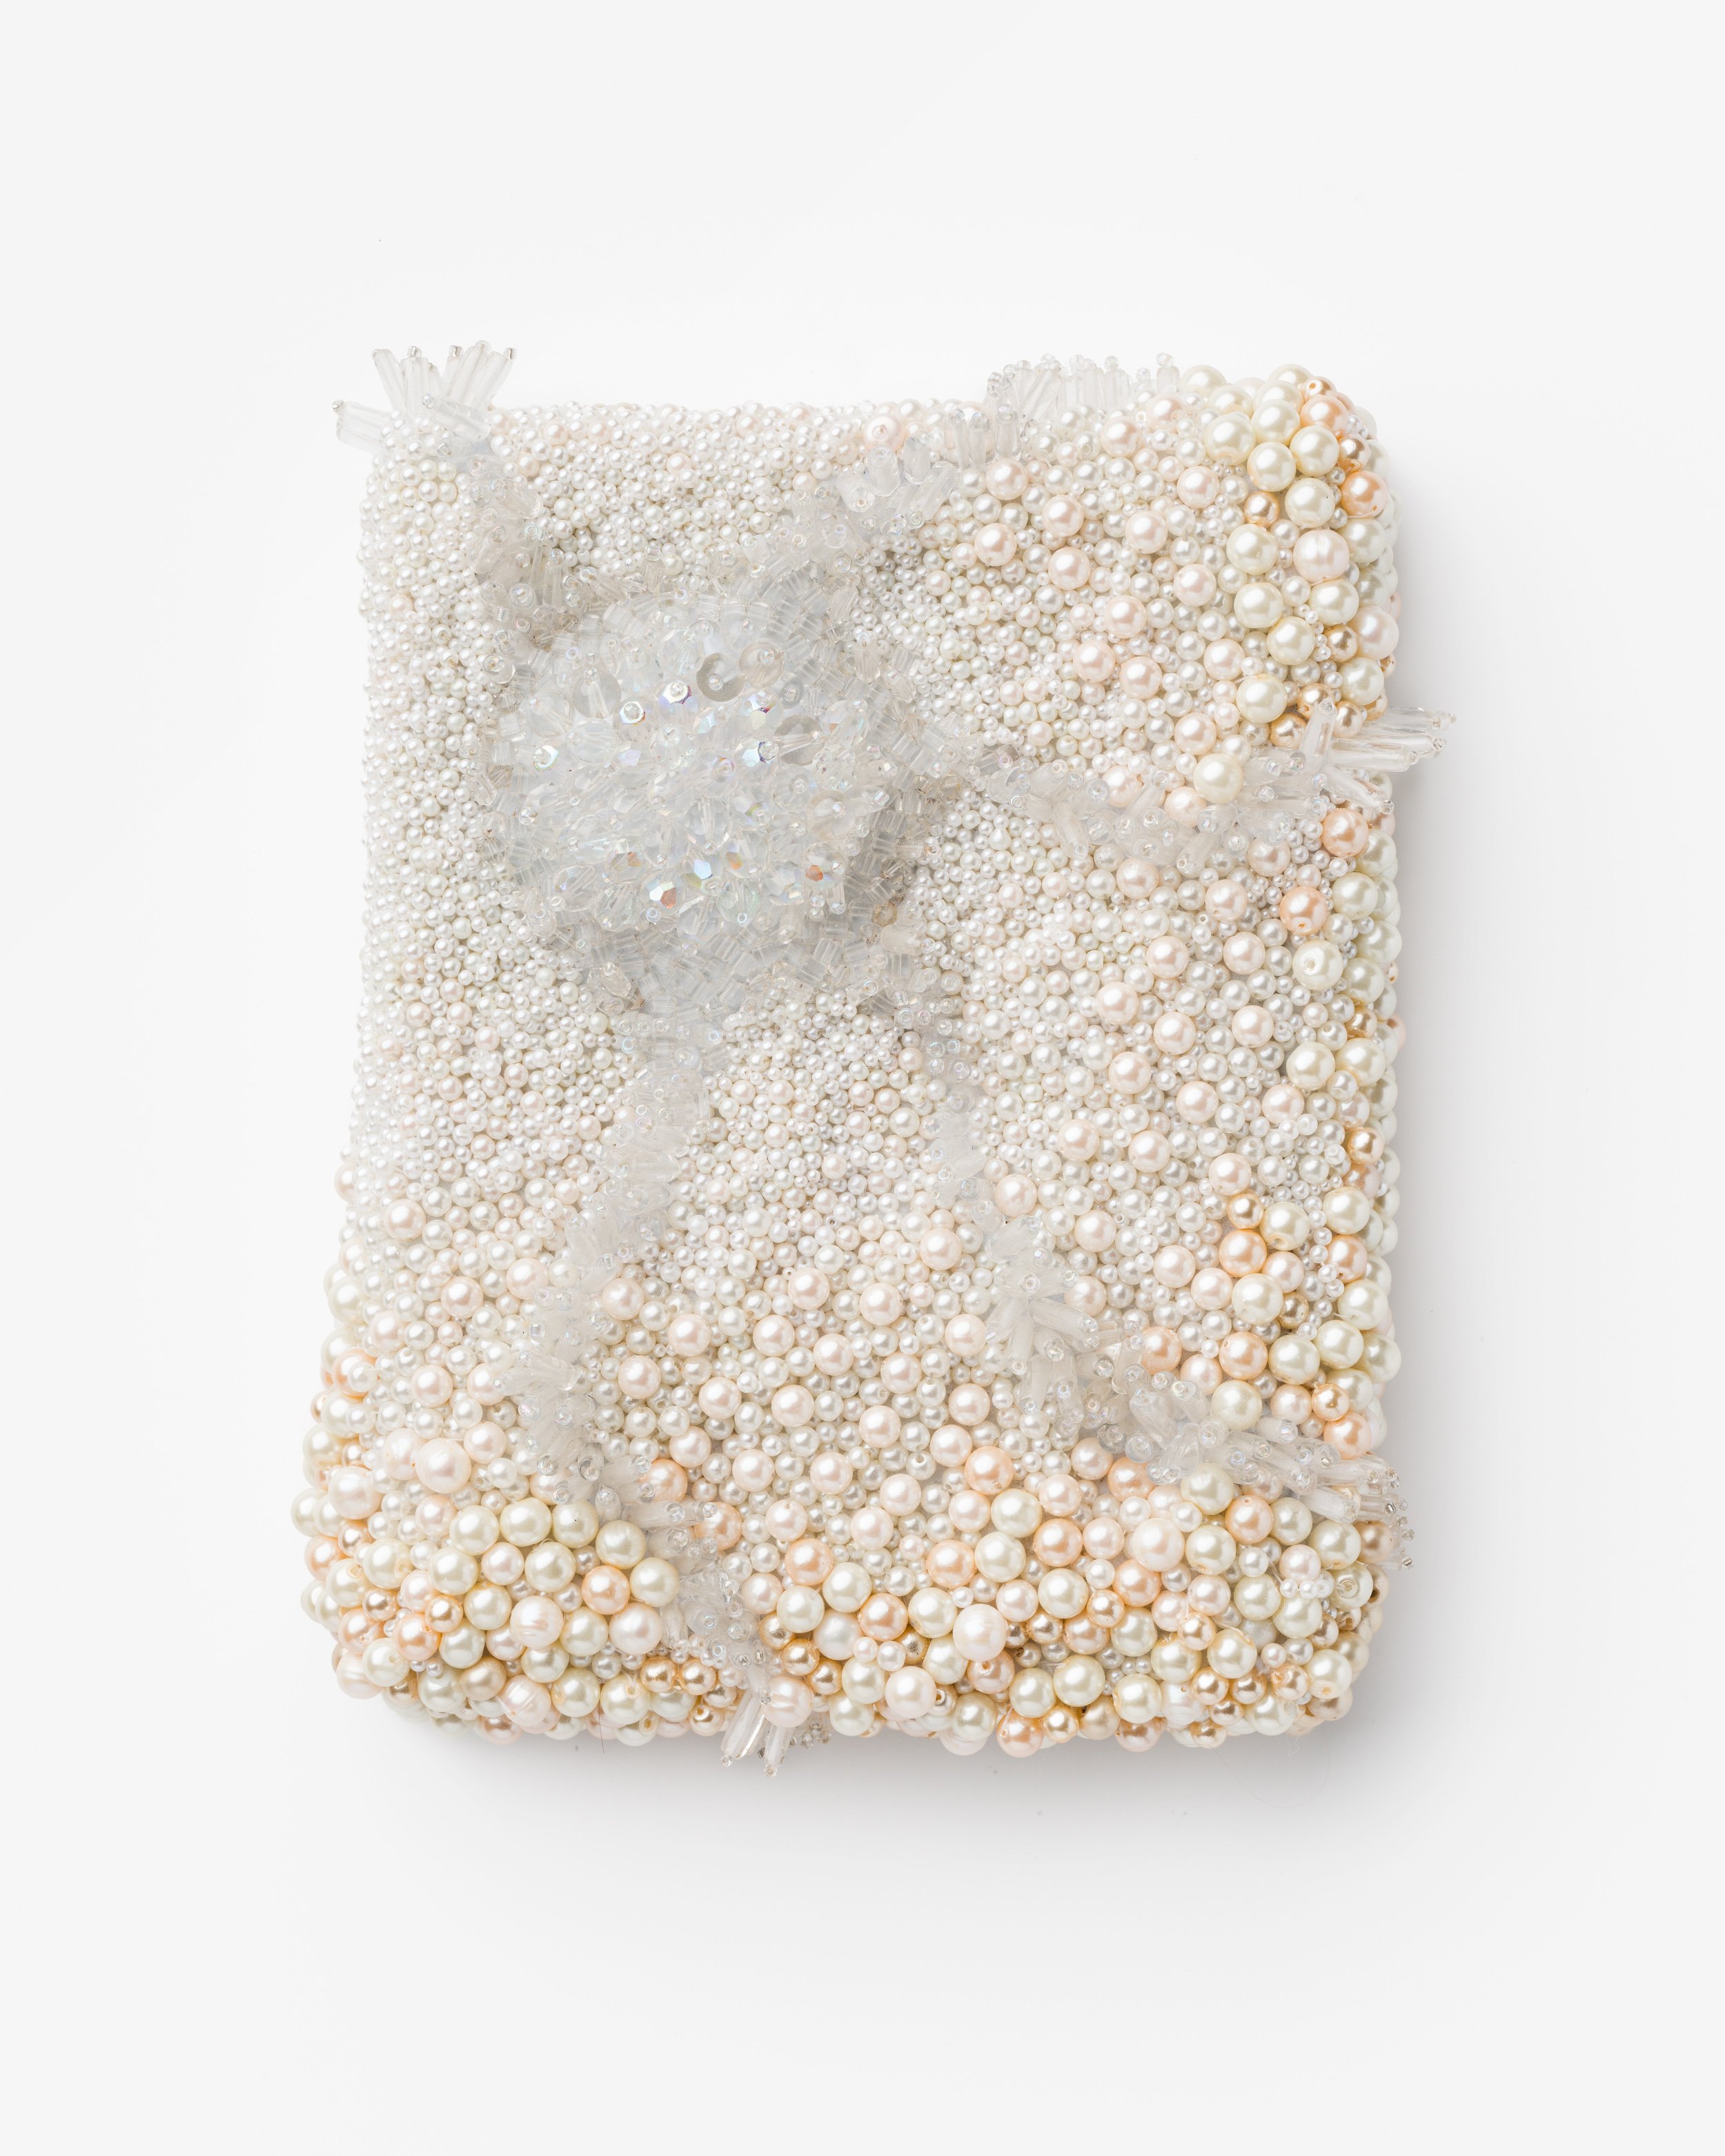   A moment eternal, no. 1 (white, cream, iridescent effervescent, pearls and crystals)    2020-2021   Beading of vintage and antique glass, plastic, pearls, swarovski crystal, quartz, polyester thread, on synthetic fabric over canvas 20cm x 16cm x 3c